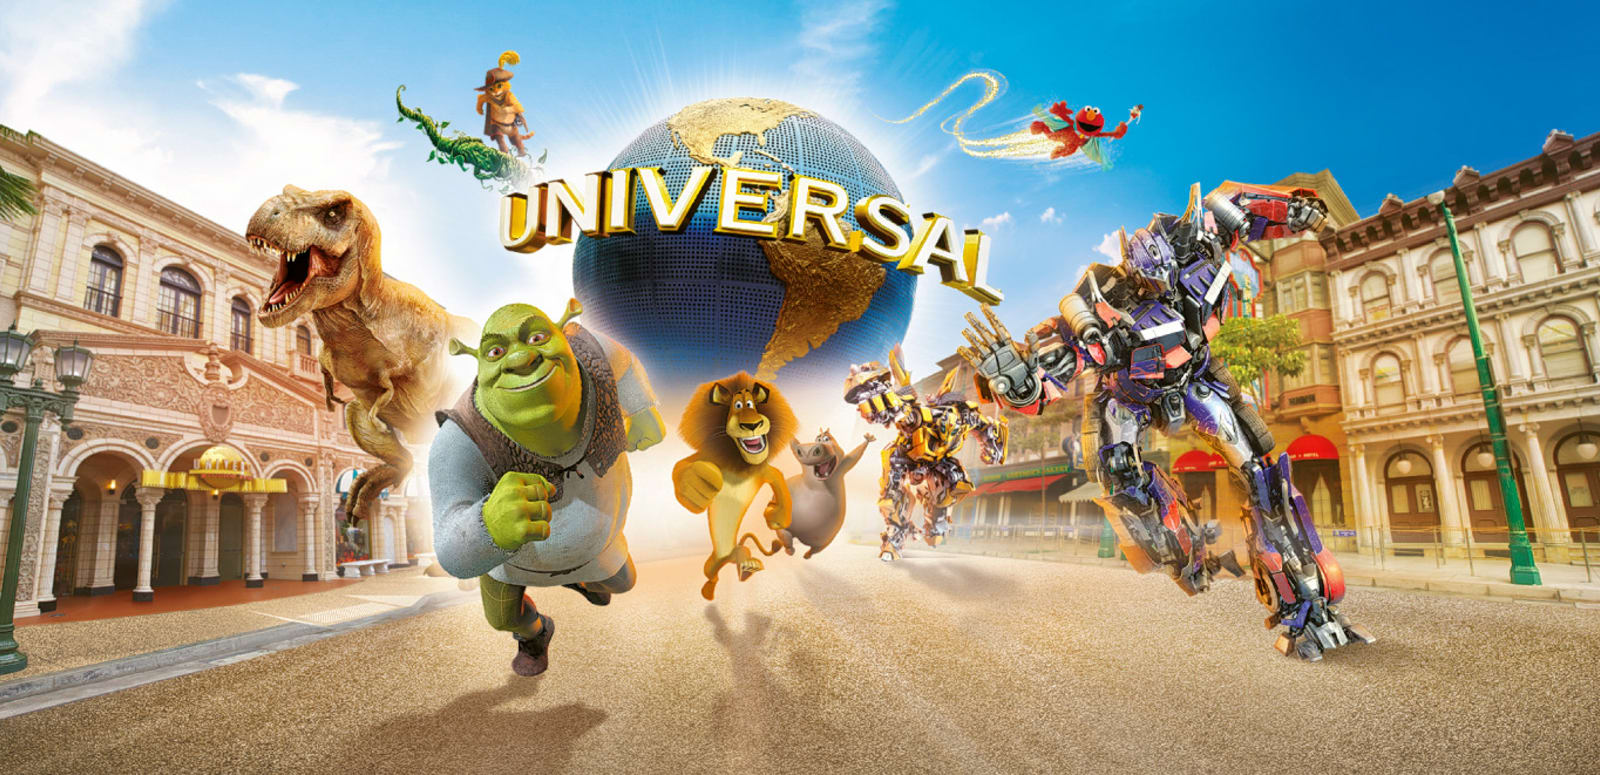 Here’s What You Need To Know About Universal Studios Beijing’s Soft Opening